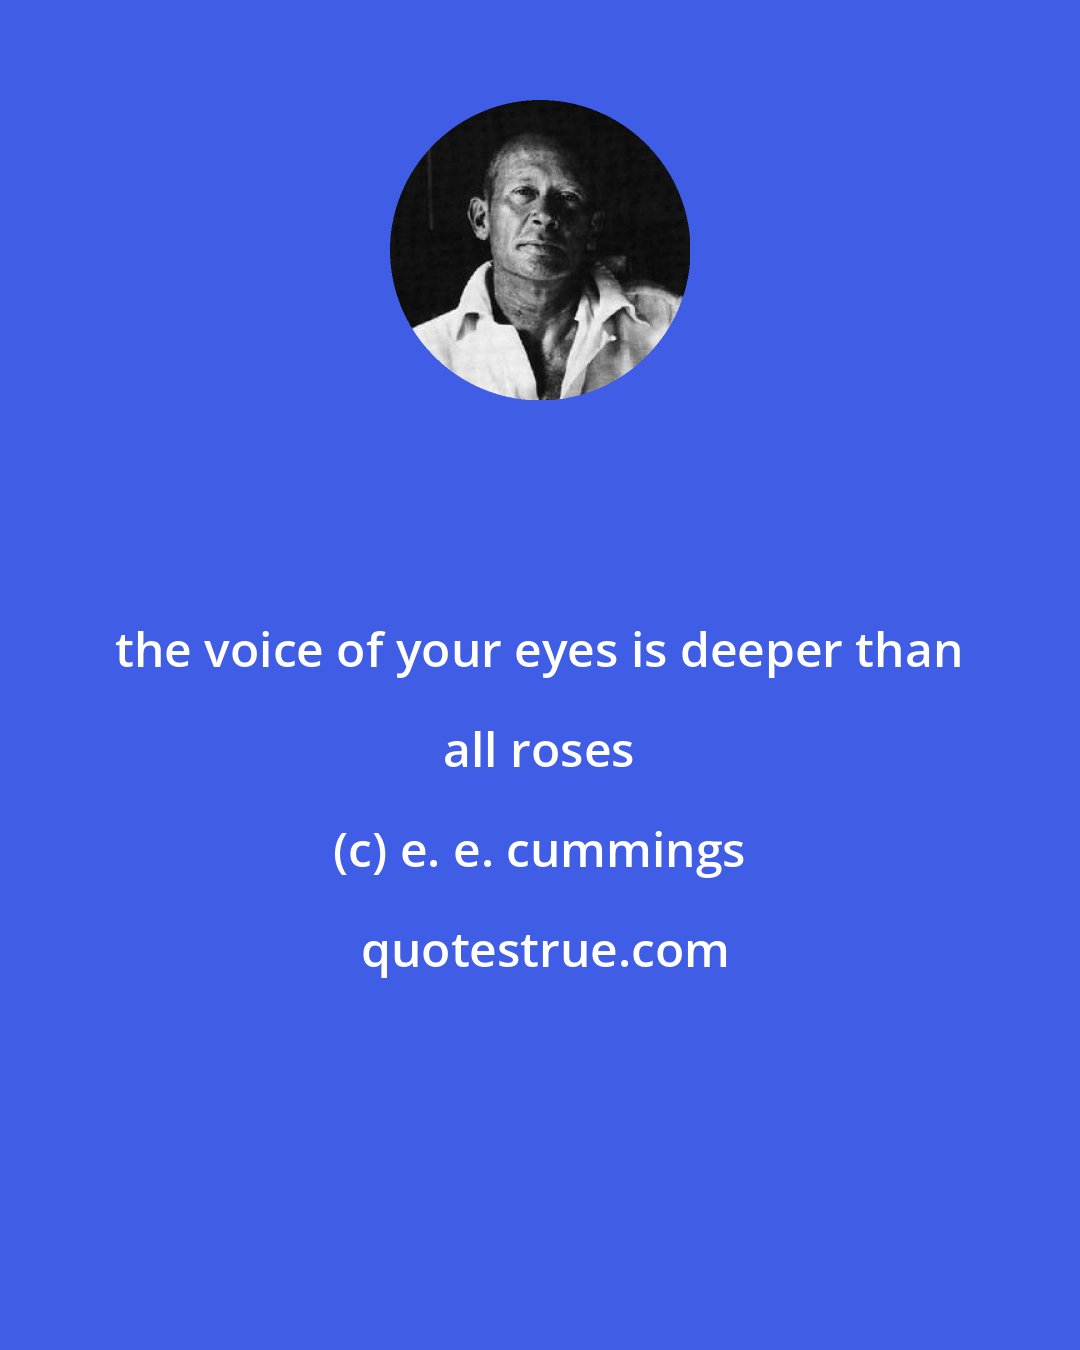 e. e. cummings: the voice of your eyes is deeper than all roses